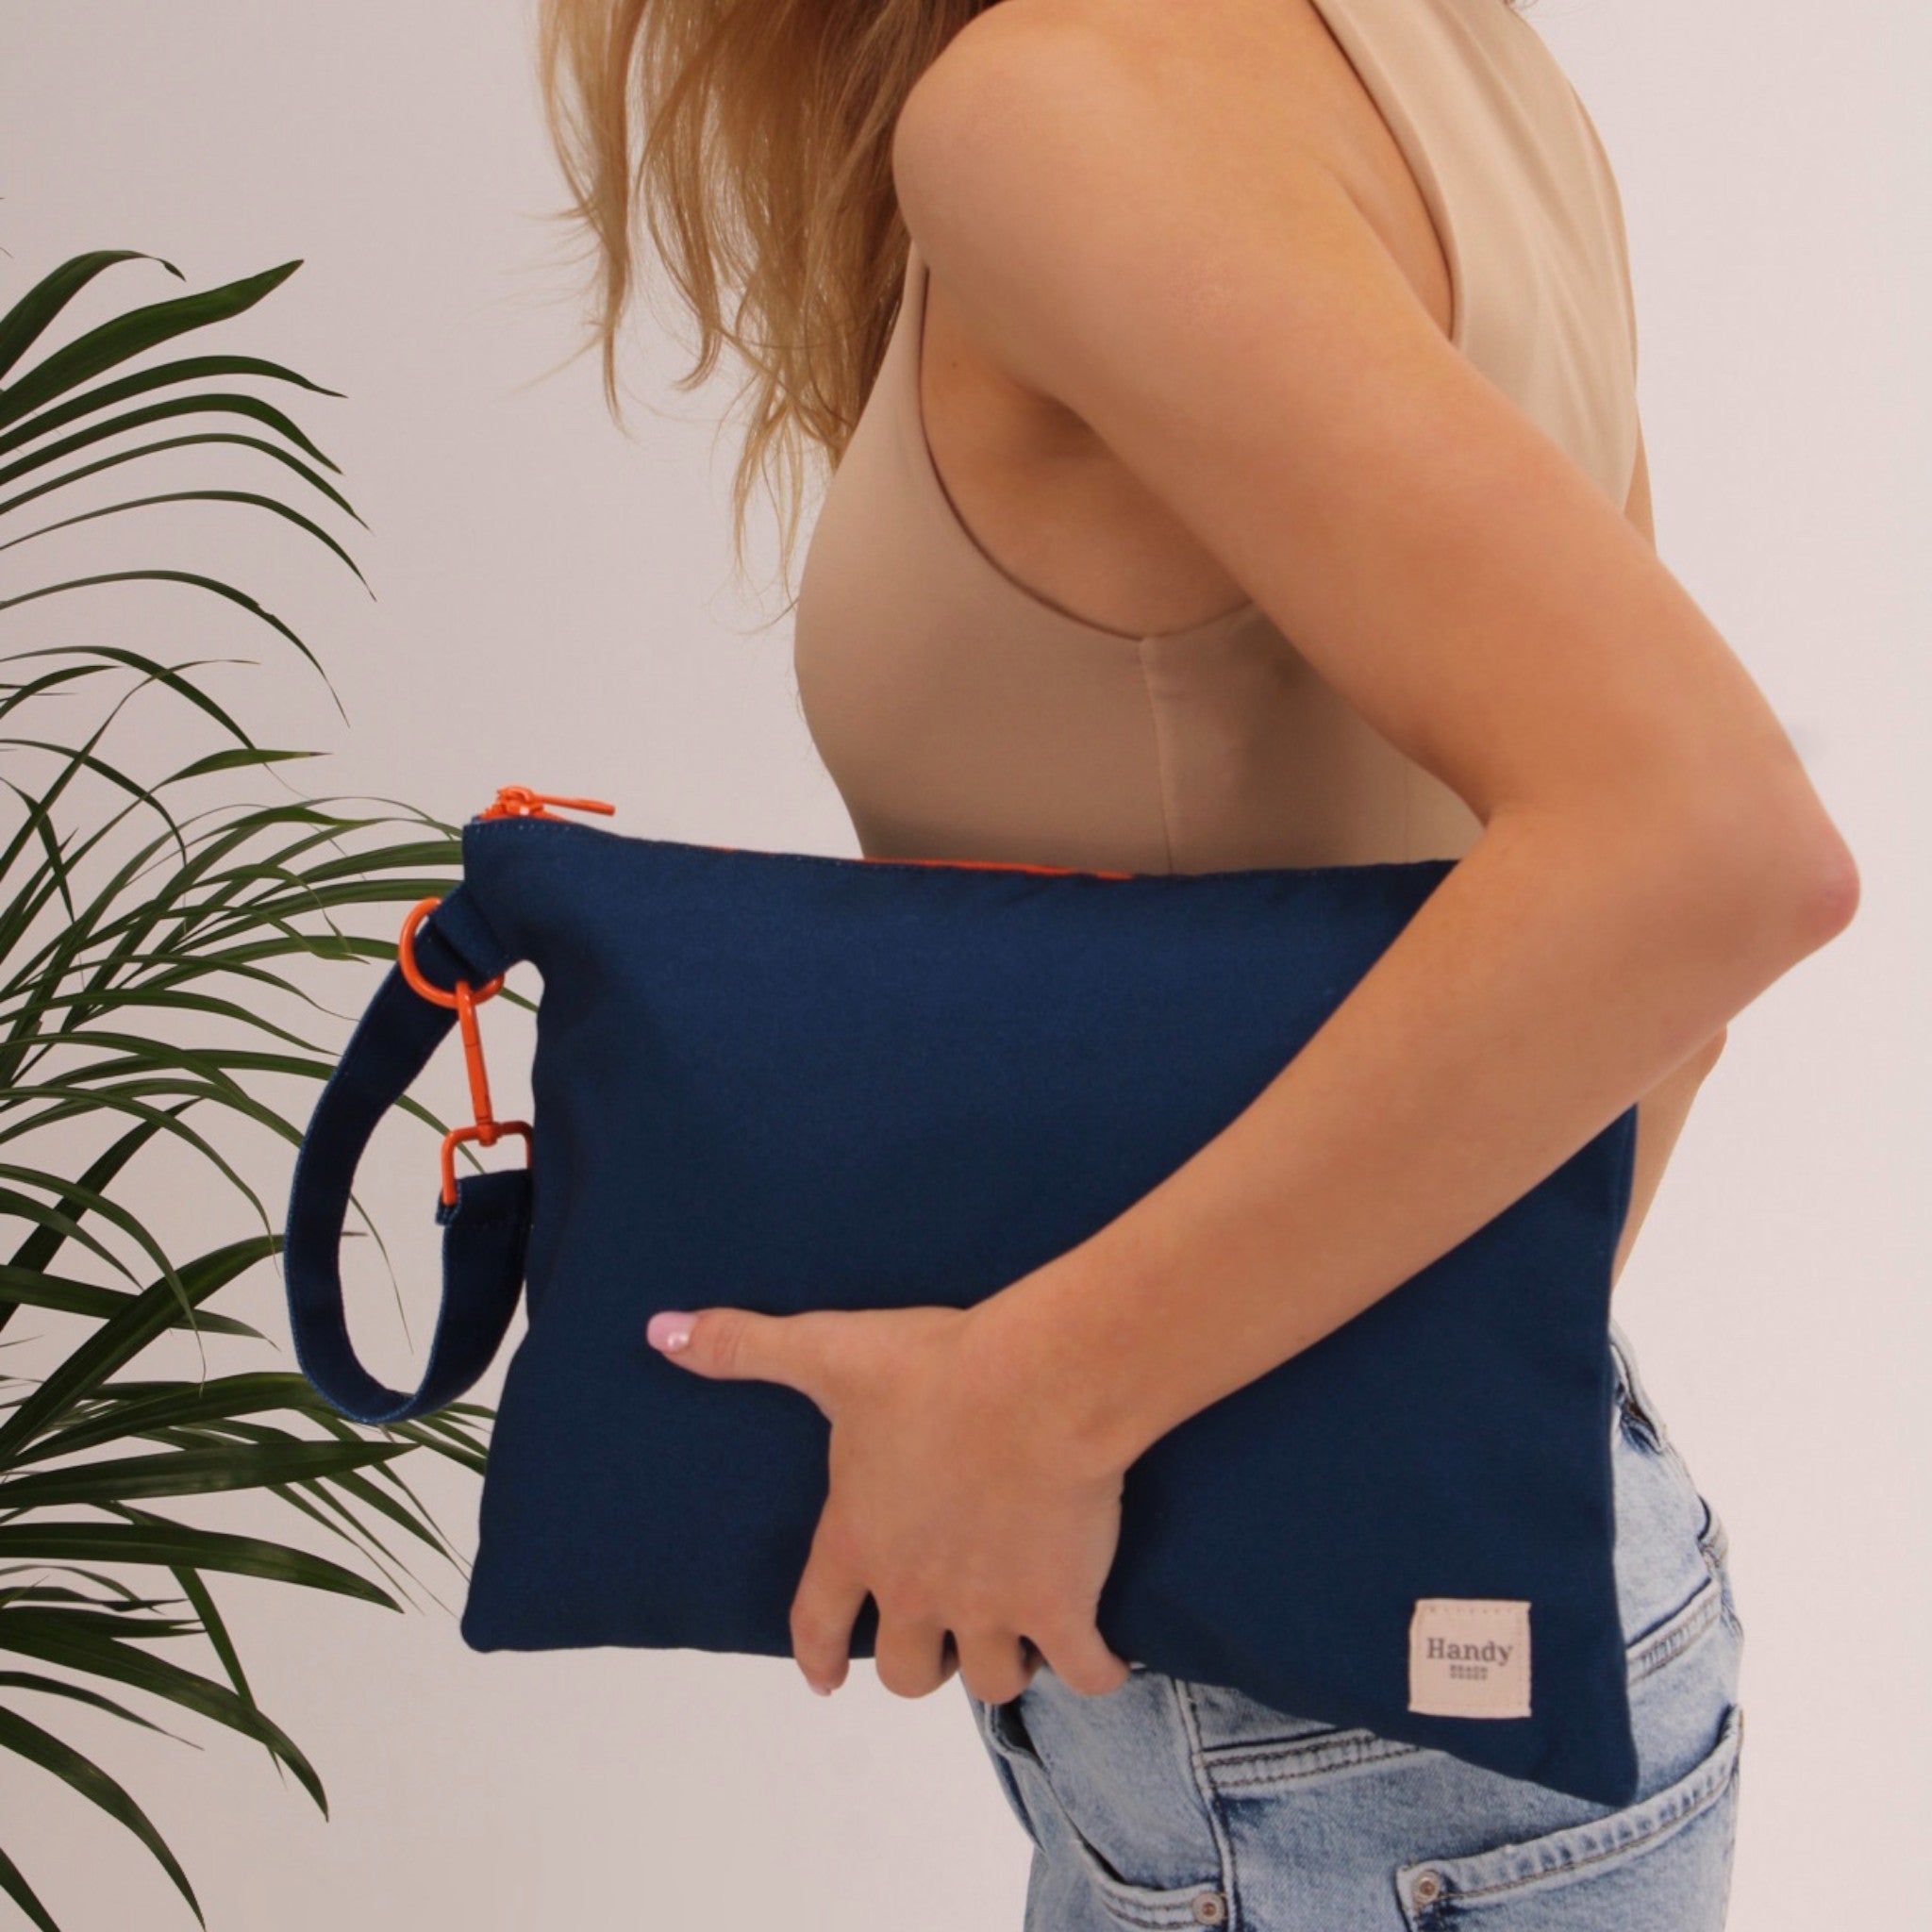 HANDY BLUE - POUCH WITH WRISTLET BUCKLE